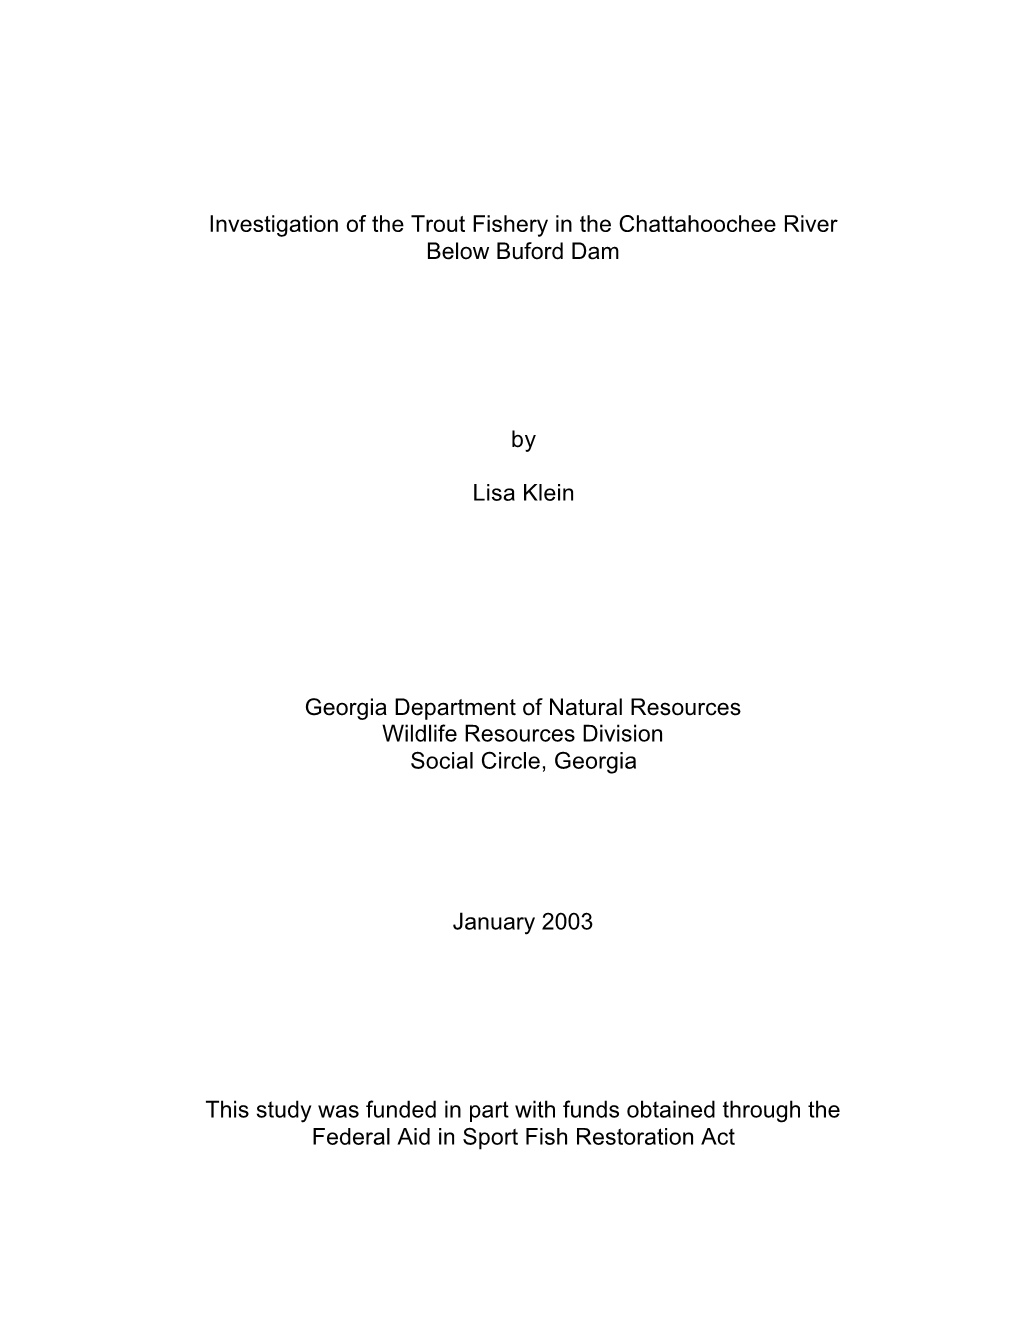 Investigation of the Trout Fishery in the Chattahoochee River Below Buford Dam